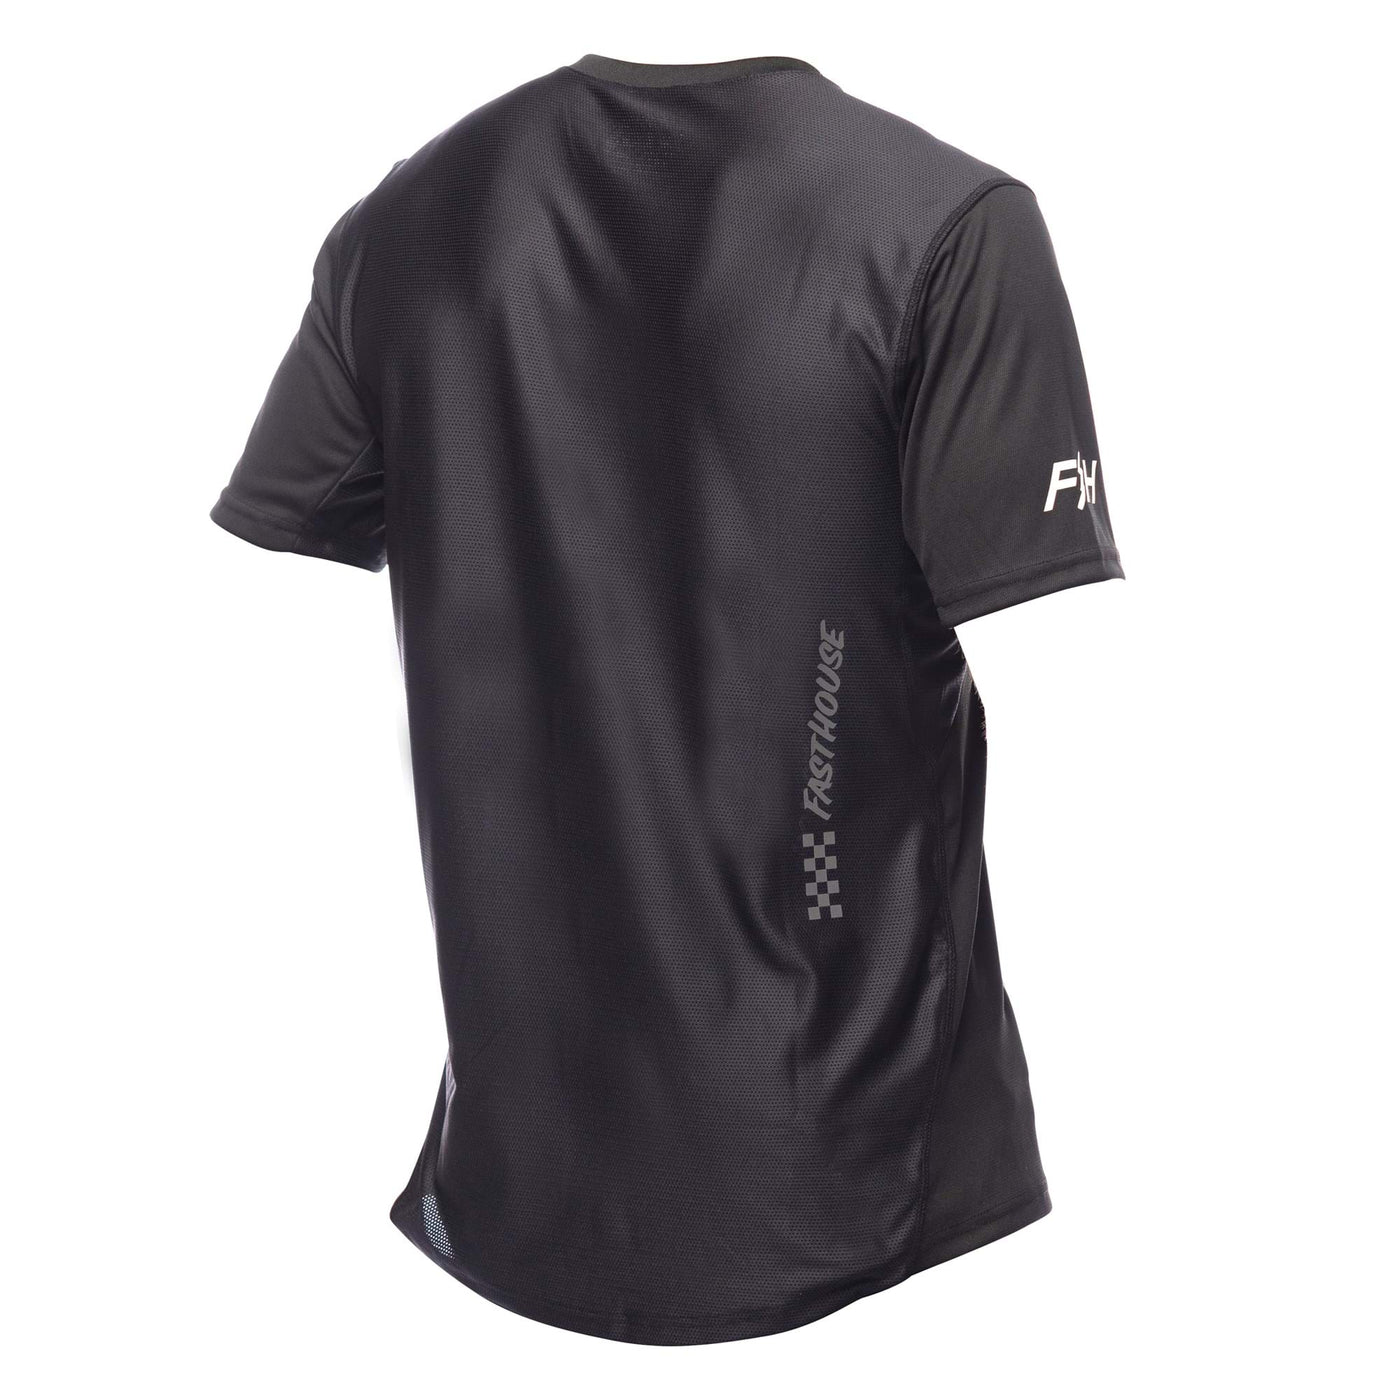 FASTHOUSE ALLOY RALLY SHORT SLEEVE JERSEY - Black